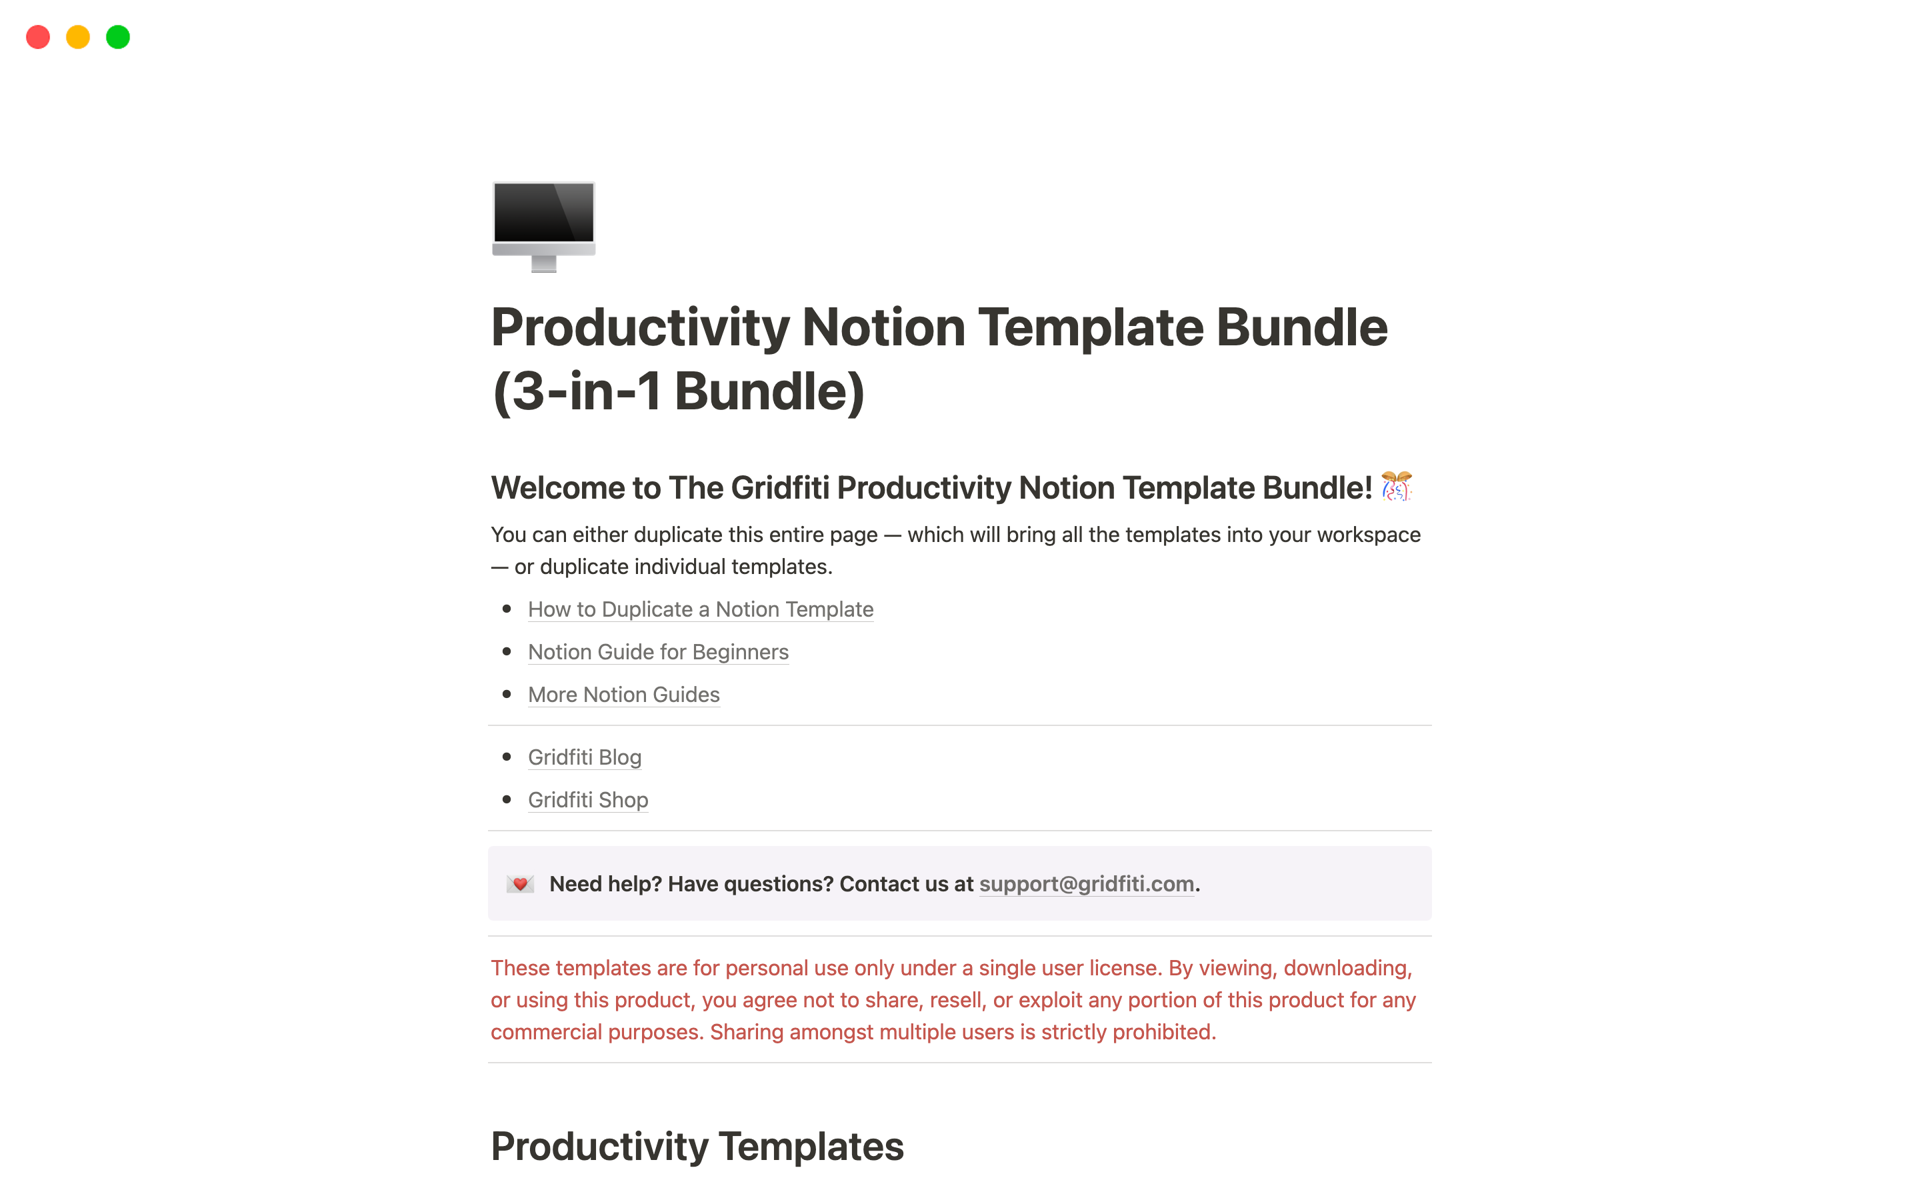 A template preview for 3-in-1 Productivity Notion Template Bundle